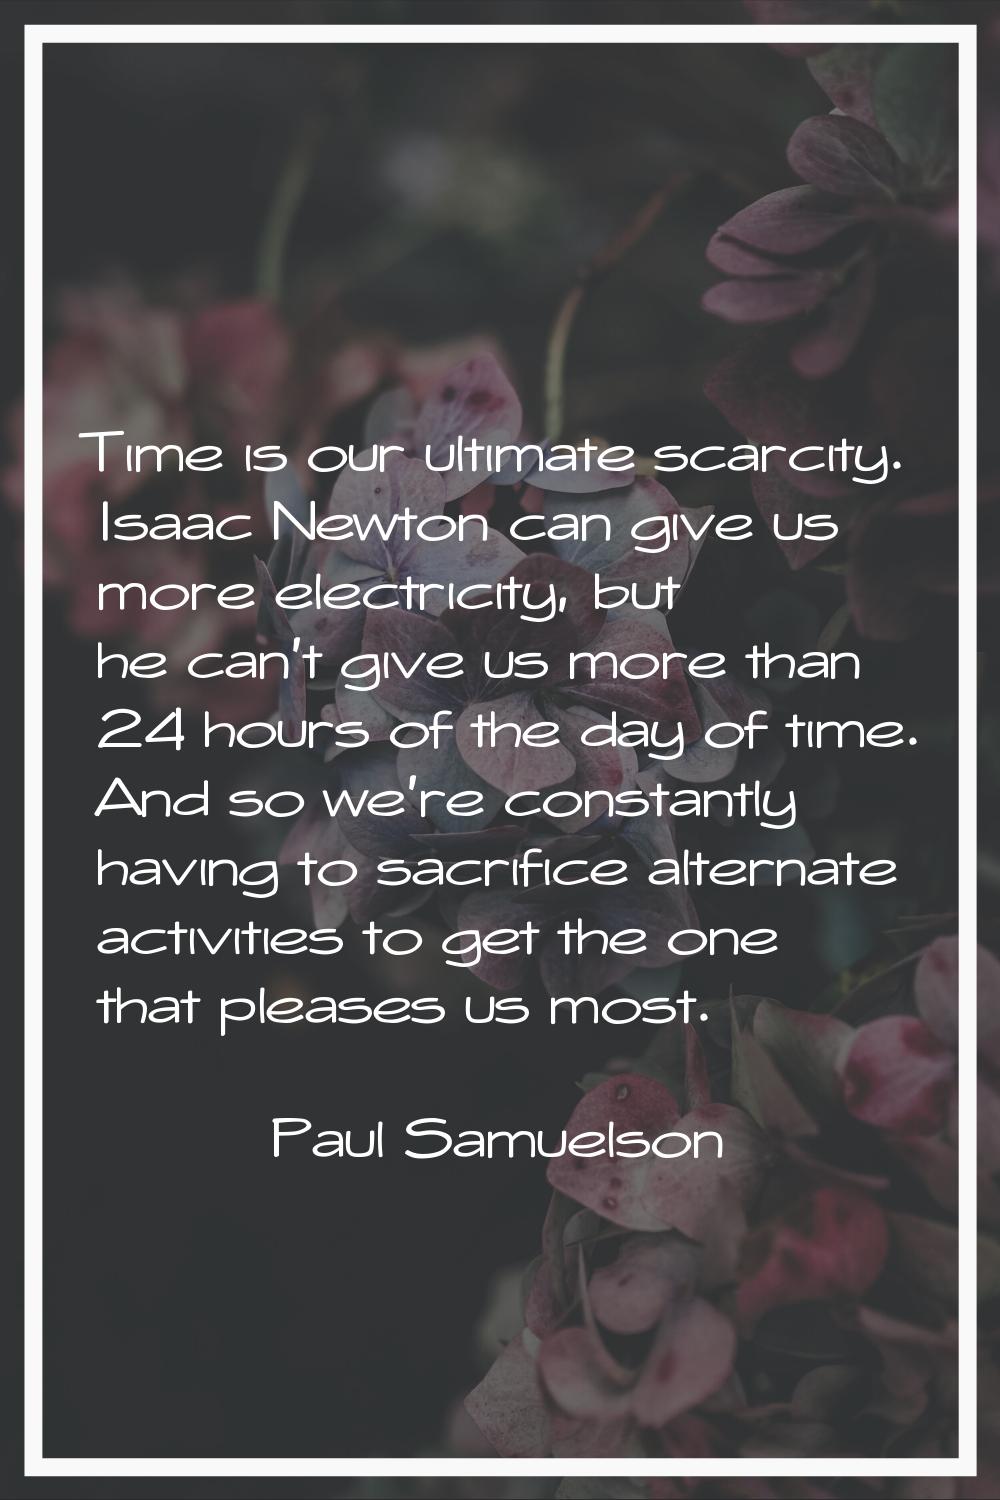 Time is our ultimate scarcity. Isaac Newton can give us more electricity, but he can't give us more